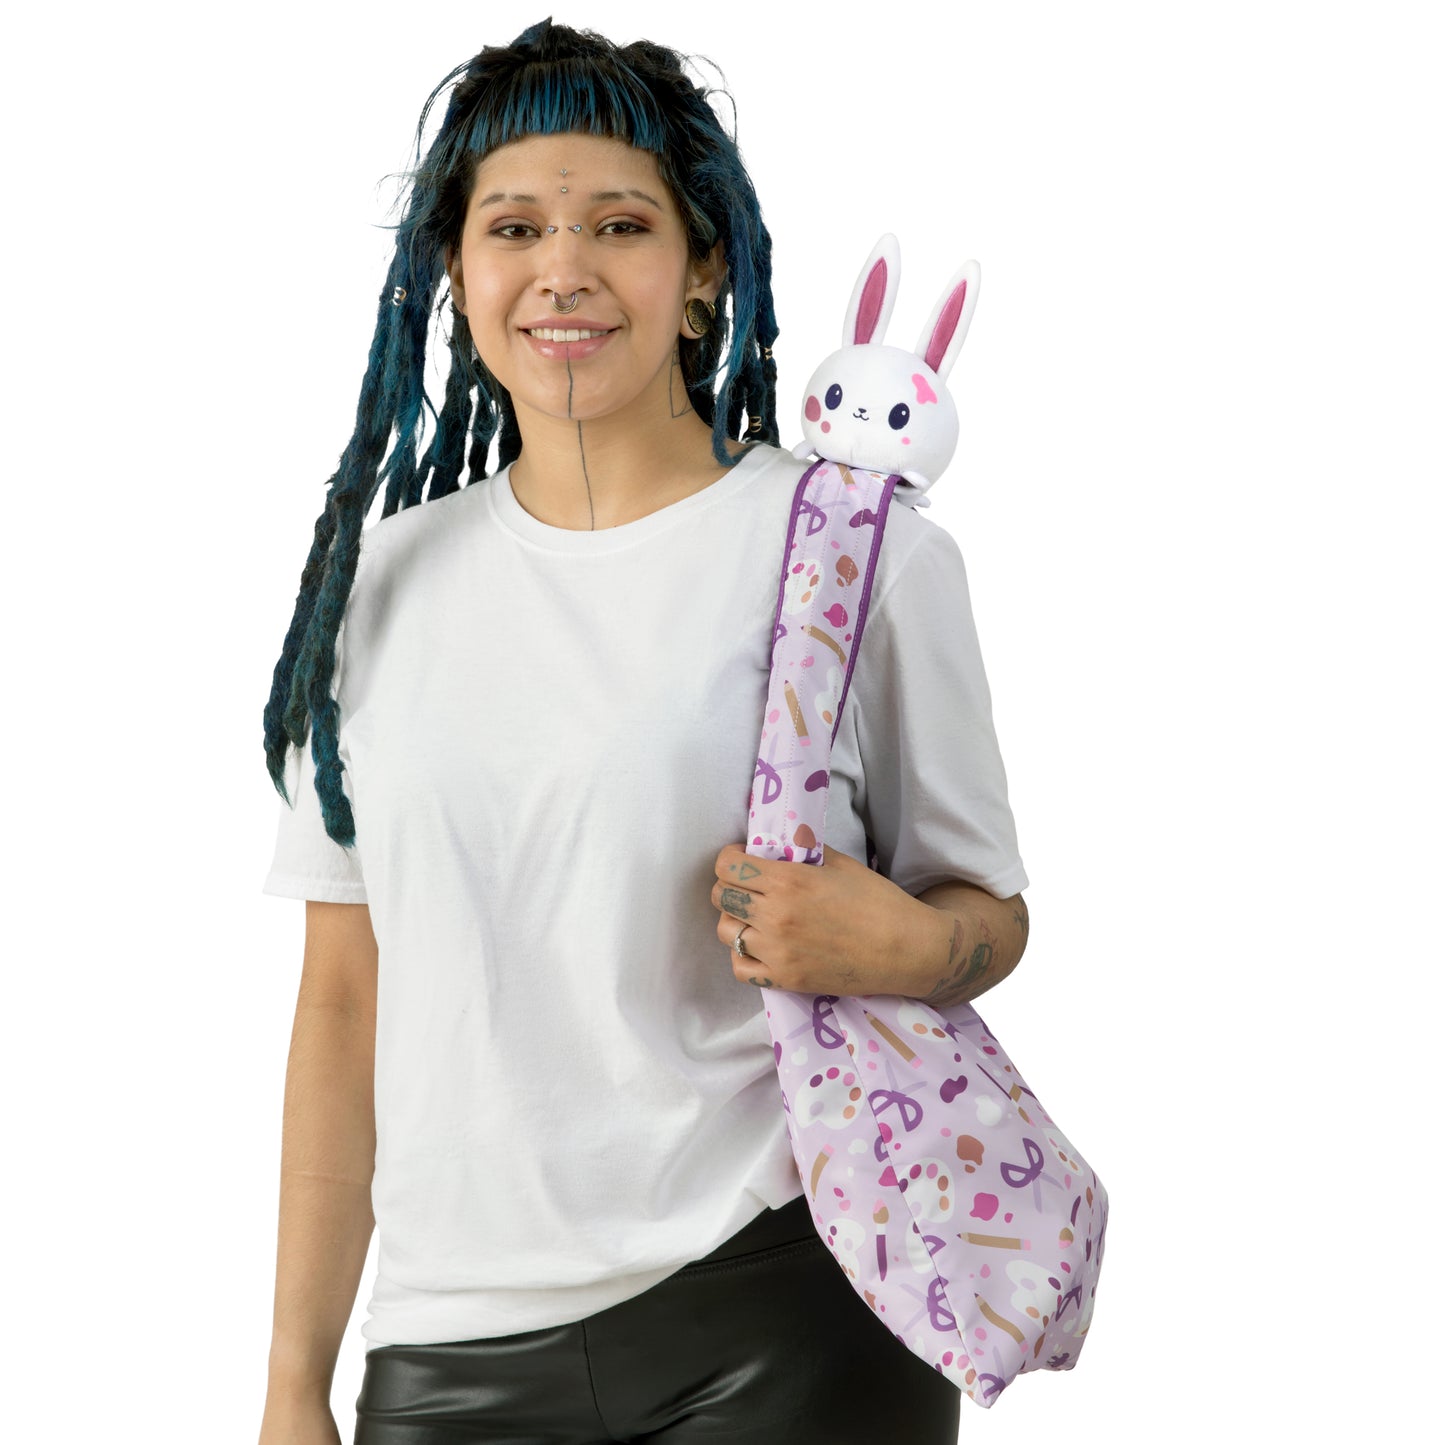 A woman with dreadlocks holding a TeeTurtle Plushiverse Arts & Crafts Bunny Plushie Tote Bag.